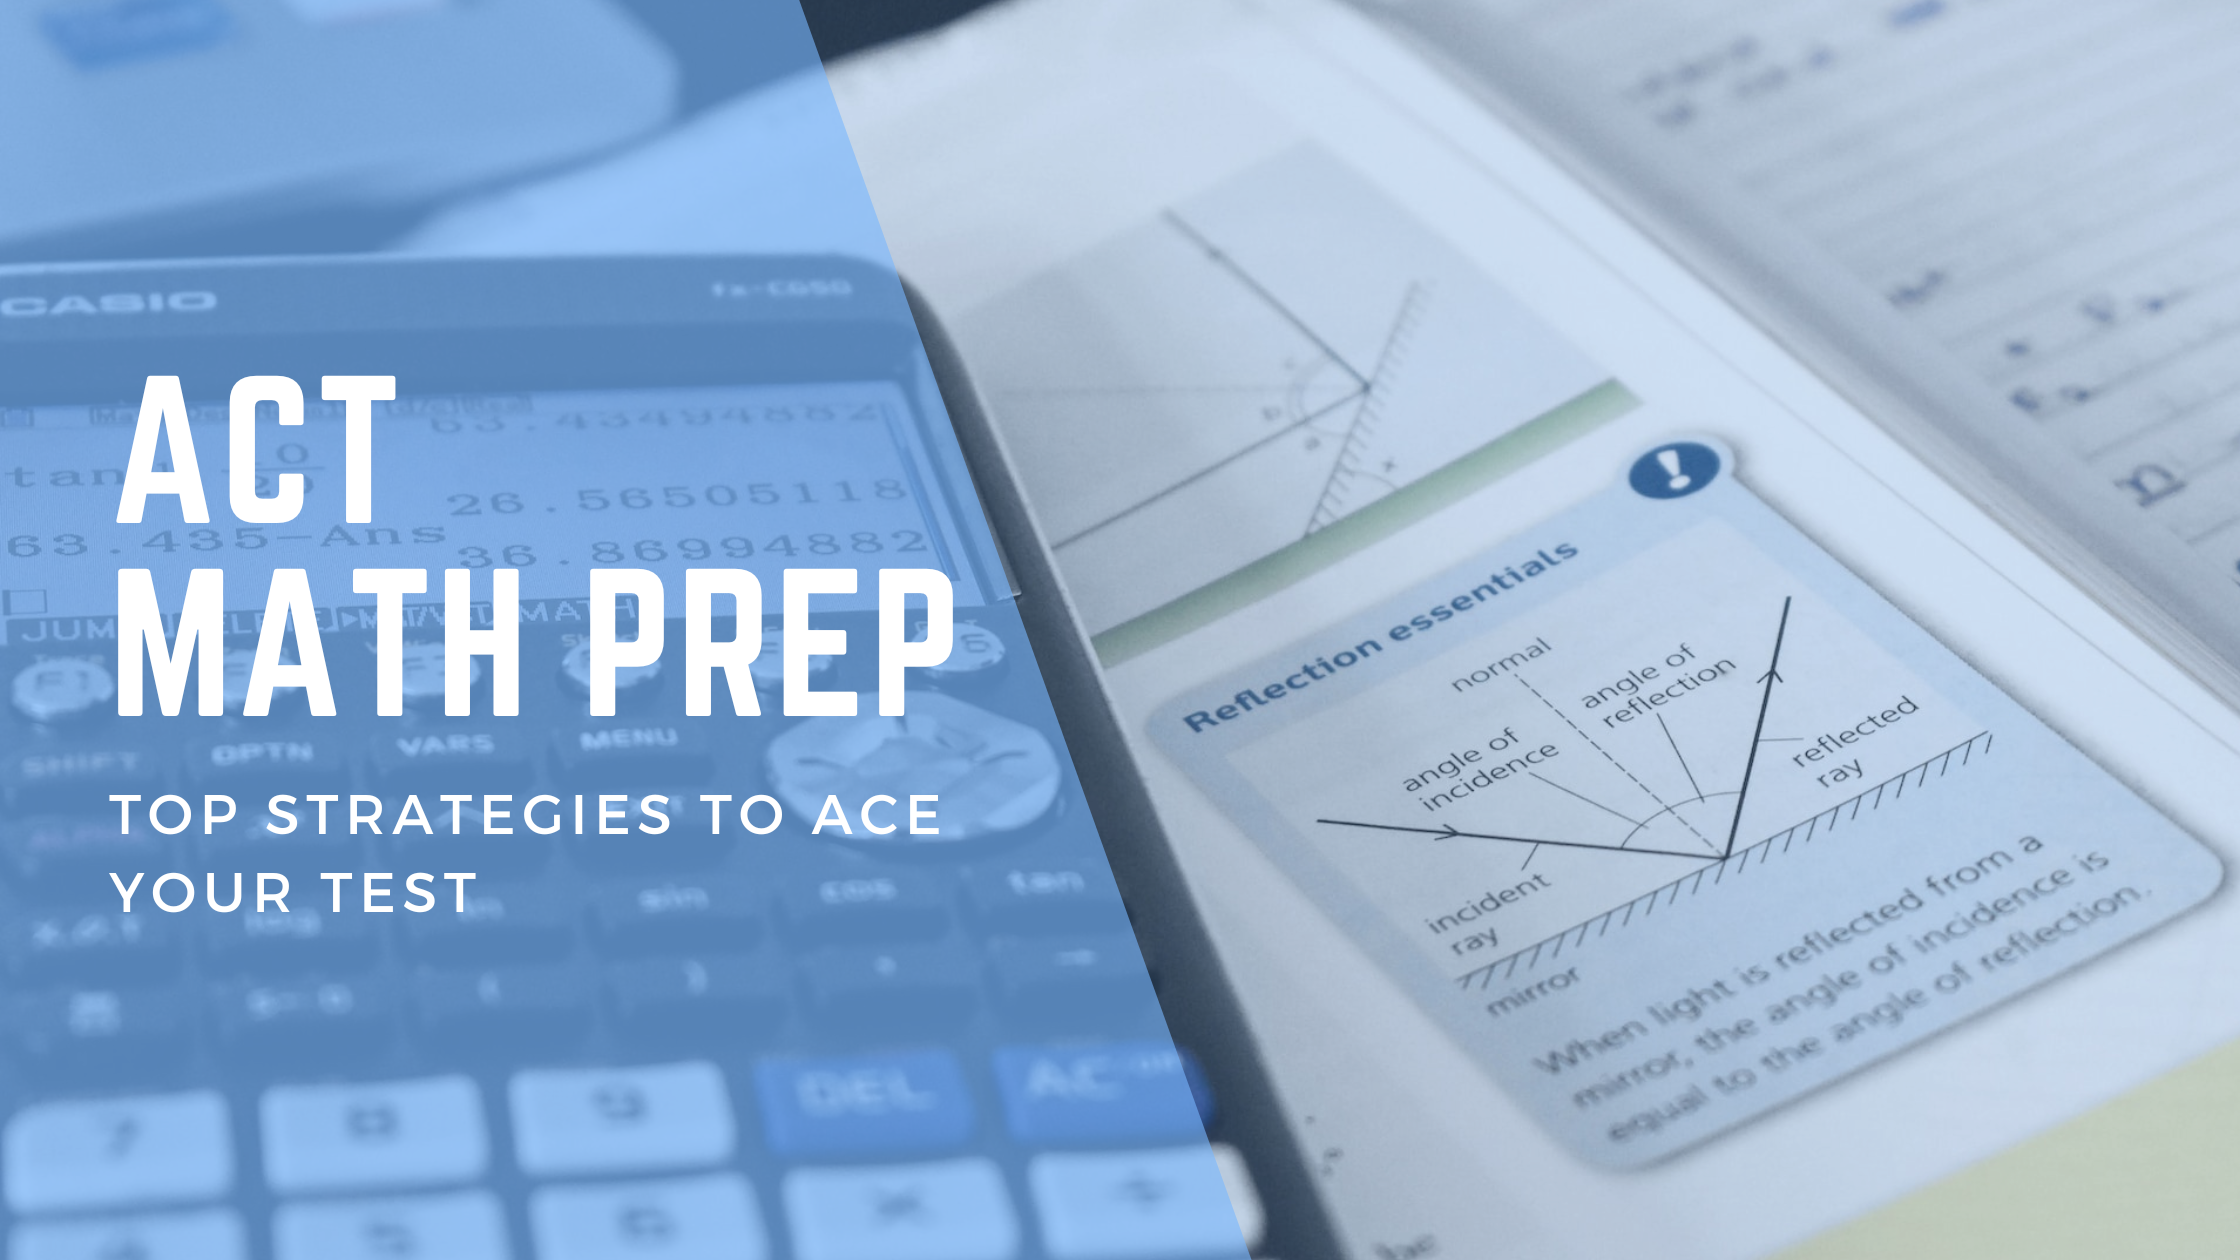 ACT math prep: Top strategies to ace your test